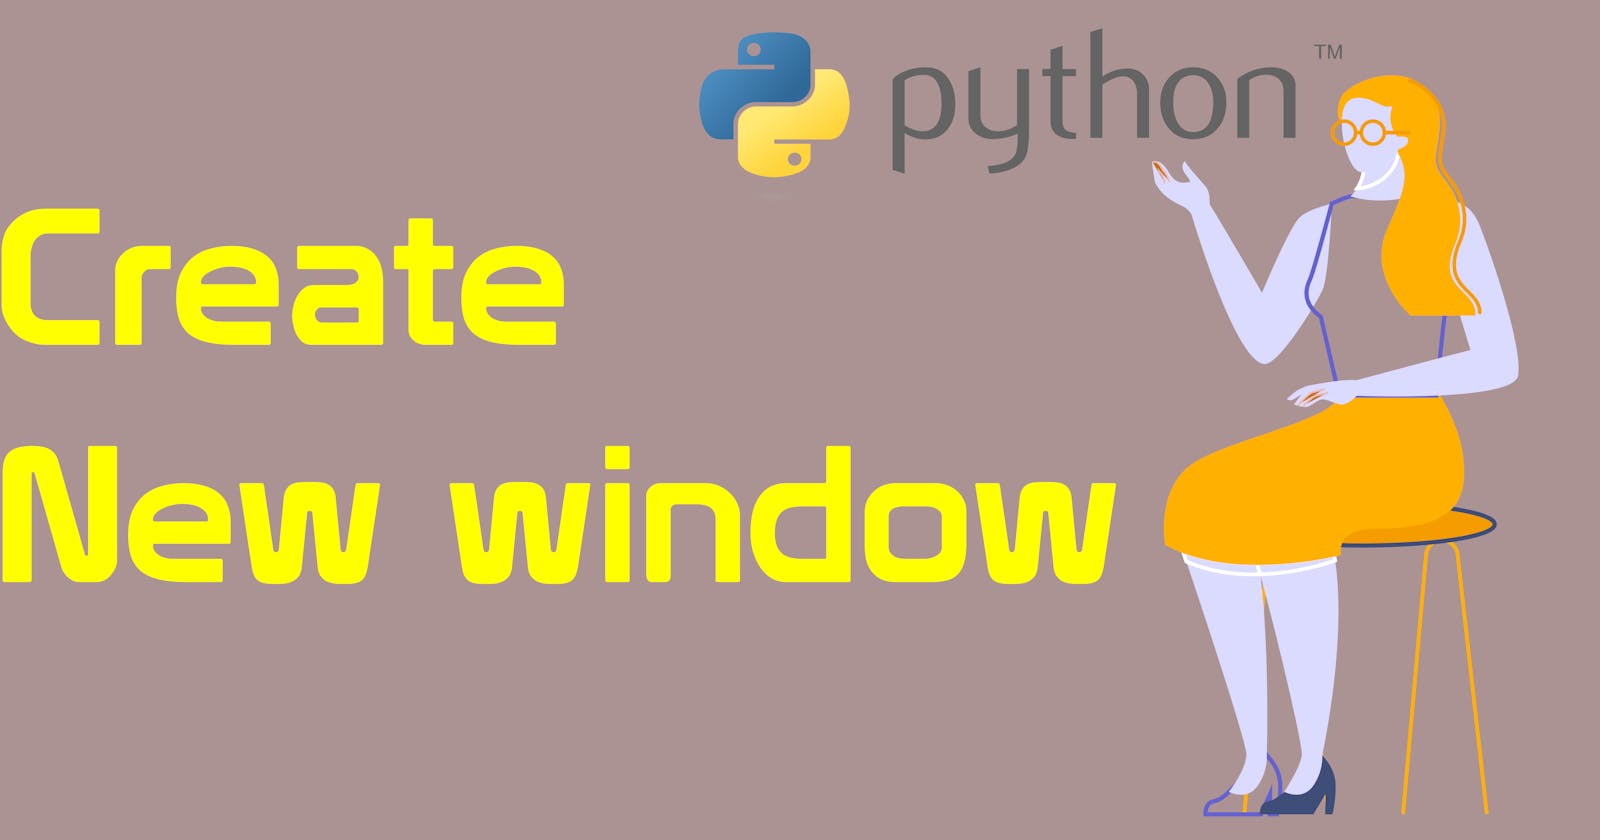 How to create multiple windows in Tkinter with a button